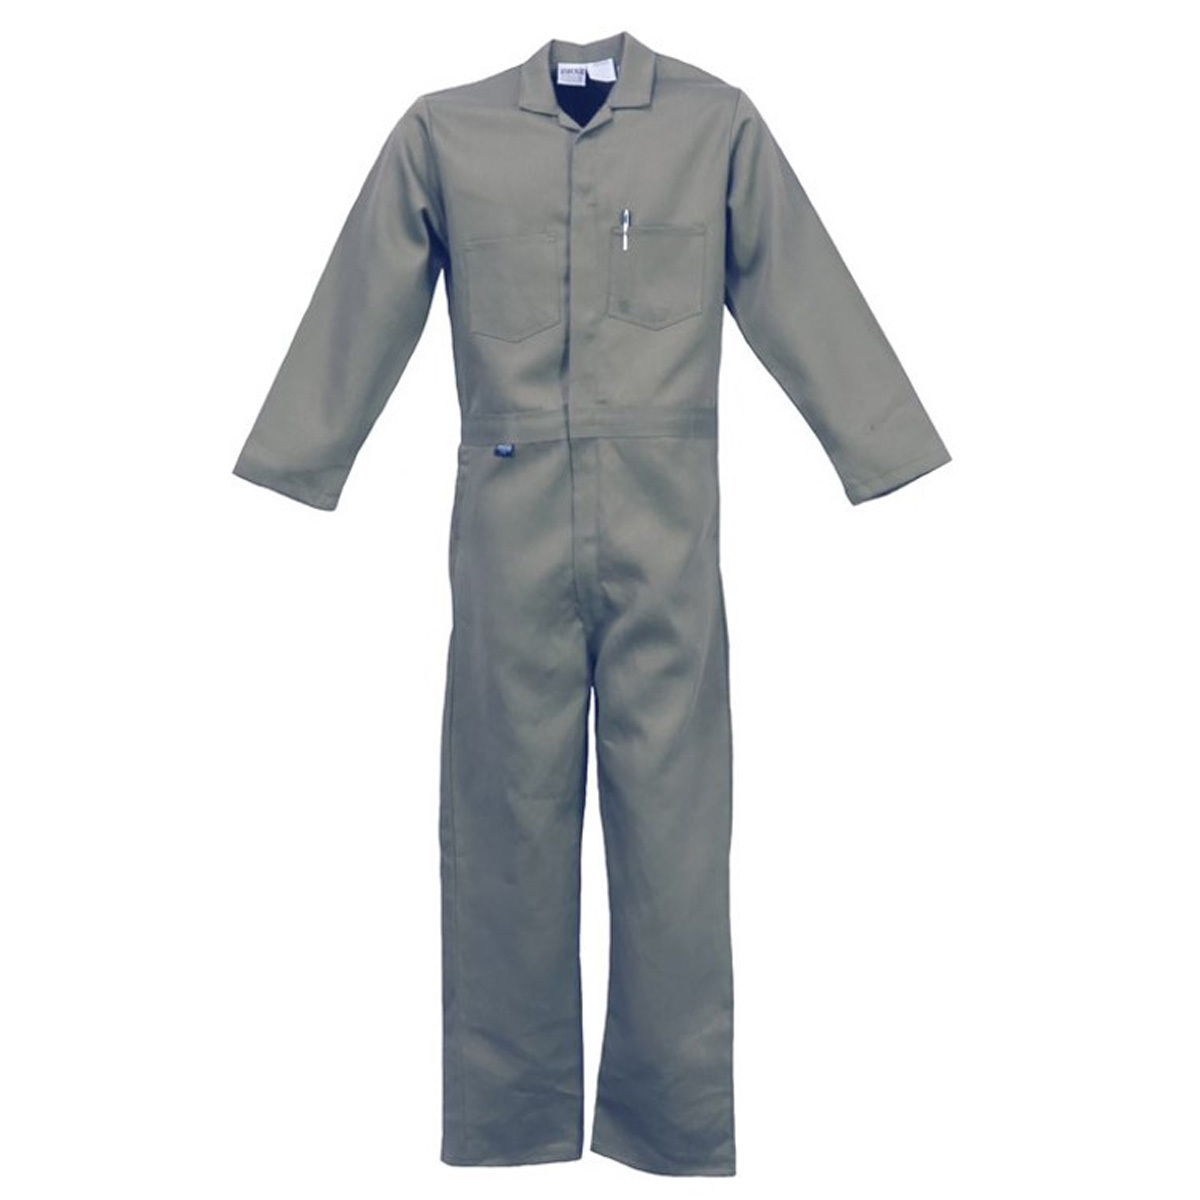 Stanco Safety Products™ X-Large Gray Indura® Arc Rated Flame Resistant Coveralls With Front Zipper Closure